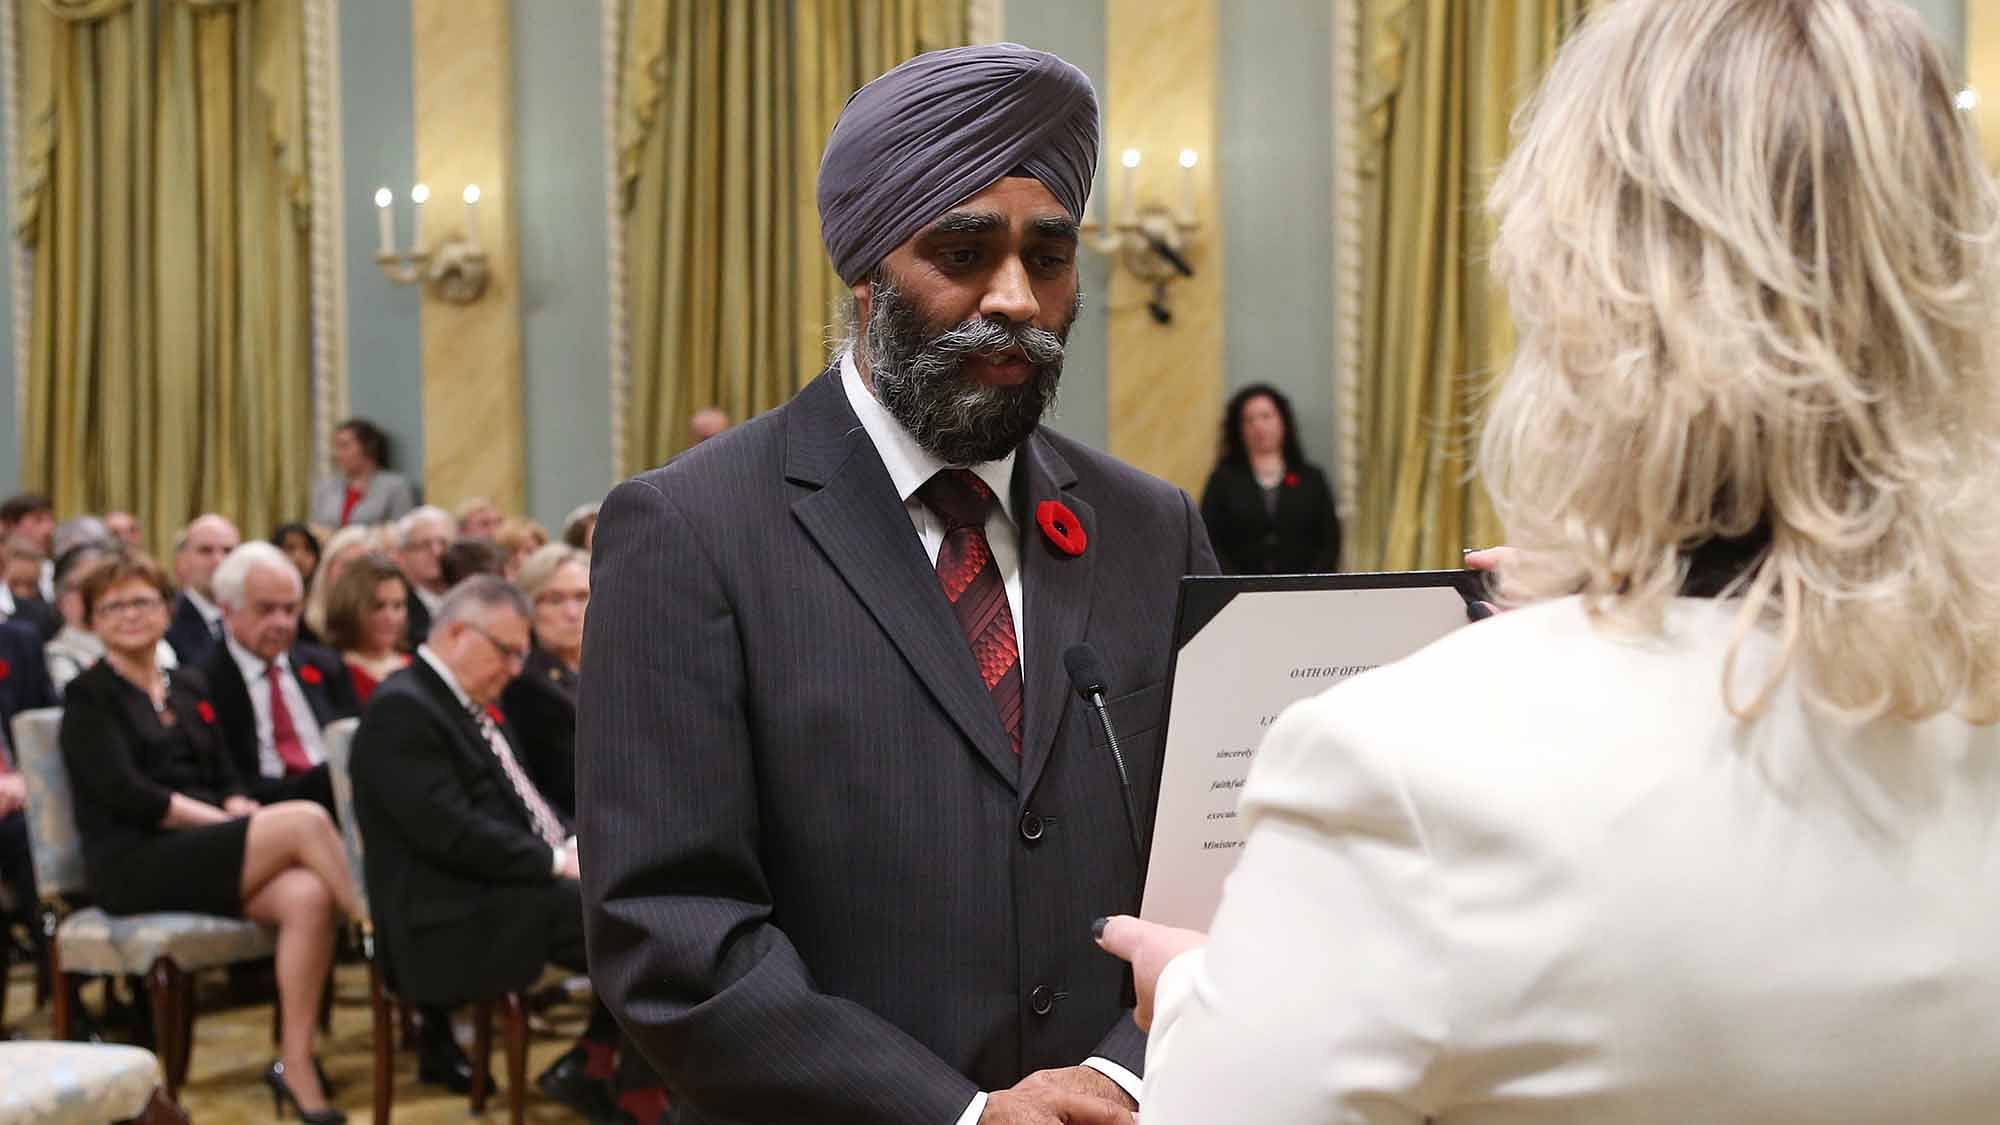 Canada’s new National Defence Minister Harjit Sajjan is sworn-in during a ceremony at Rideau Hall in Ottawa. (Photo: Reuters)